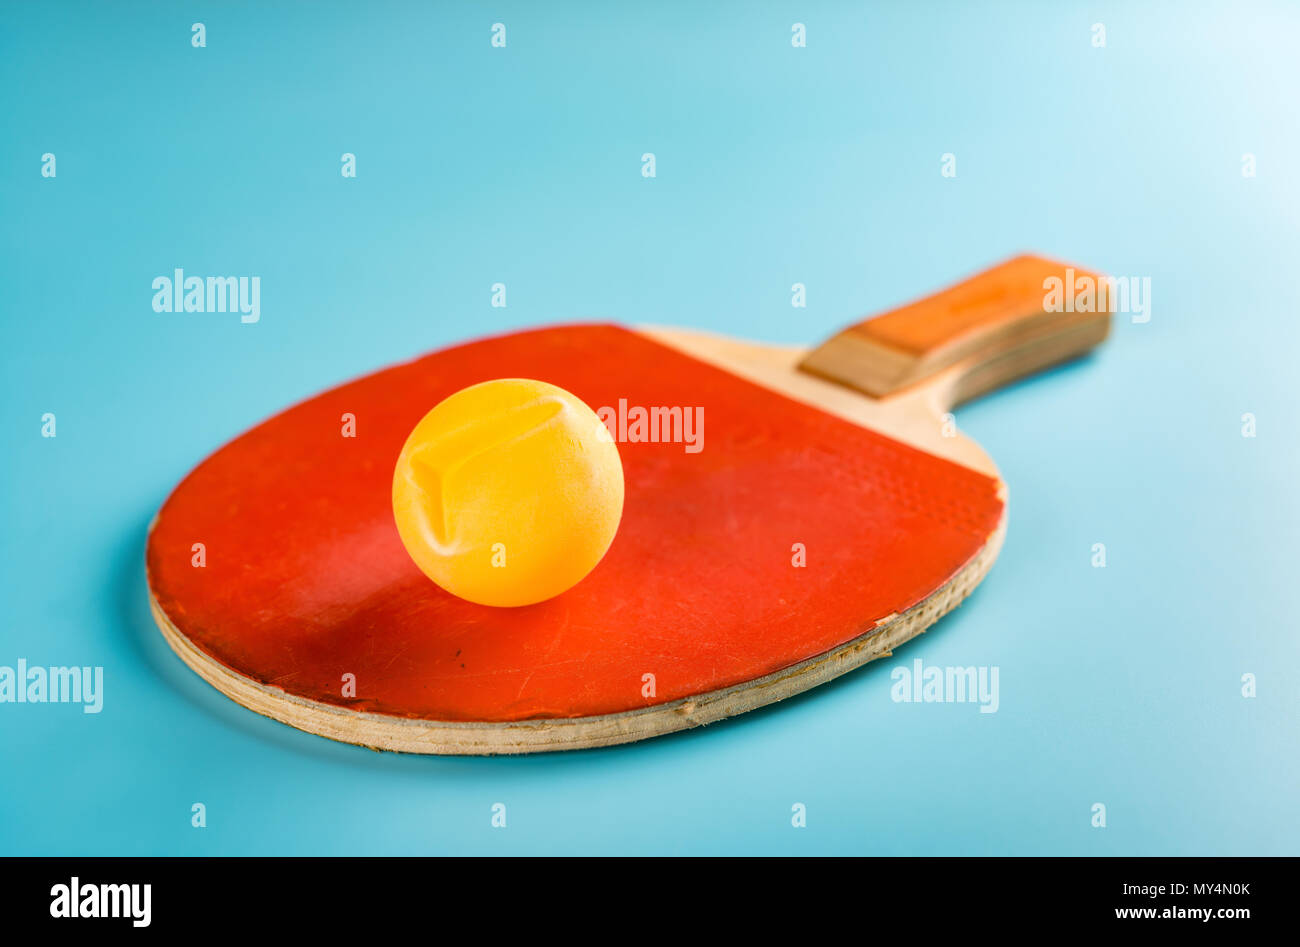 old pingpong racket and a dented ball on a blue background Stock Photo